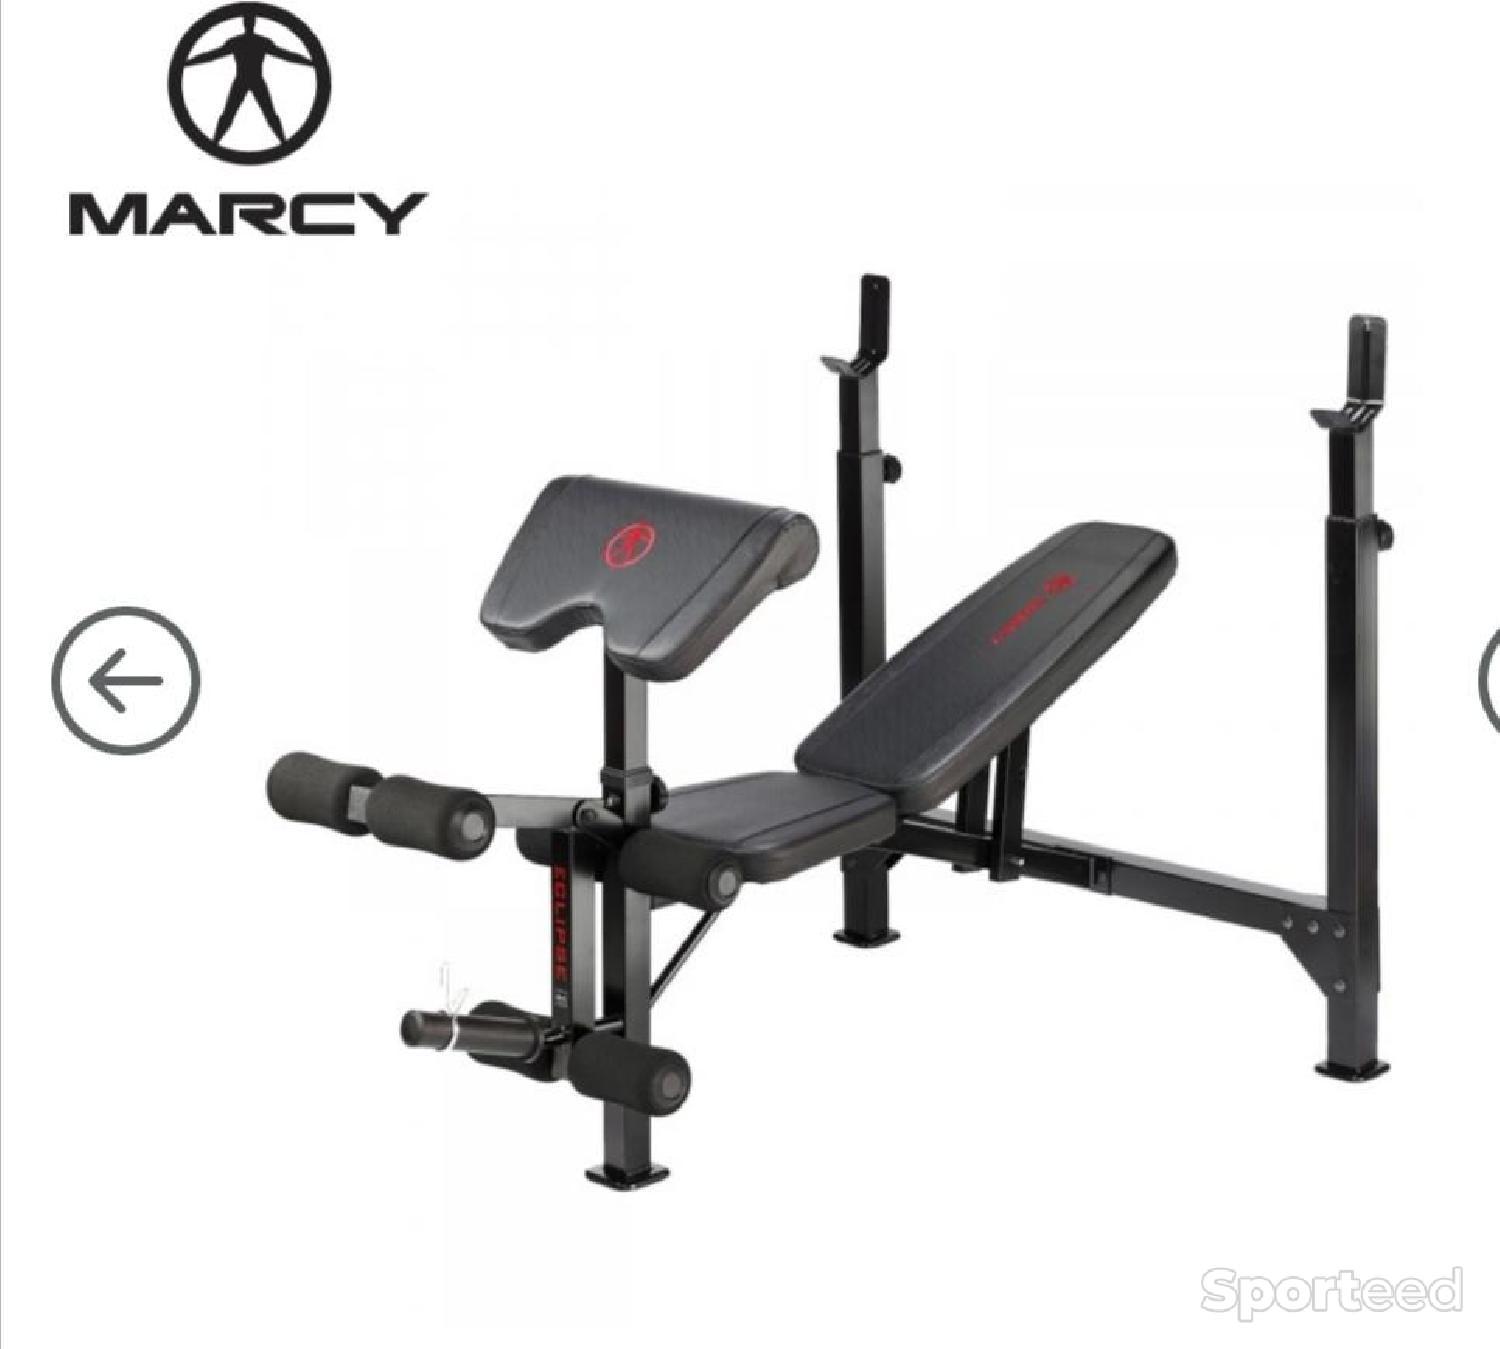 Banc de musculation Marcy neuf : Equipements